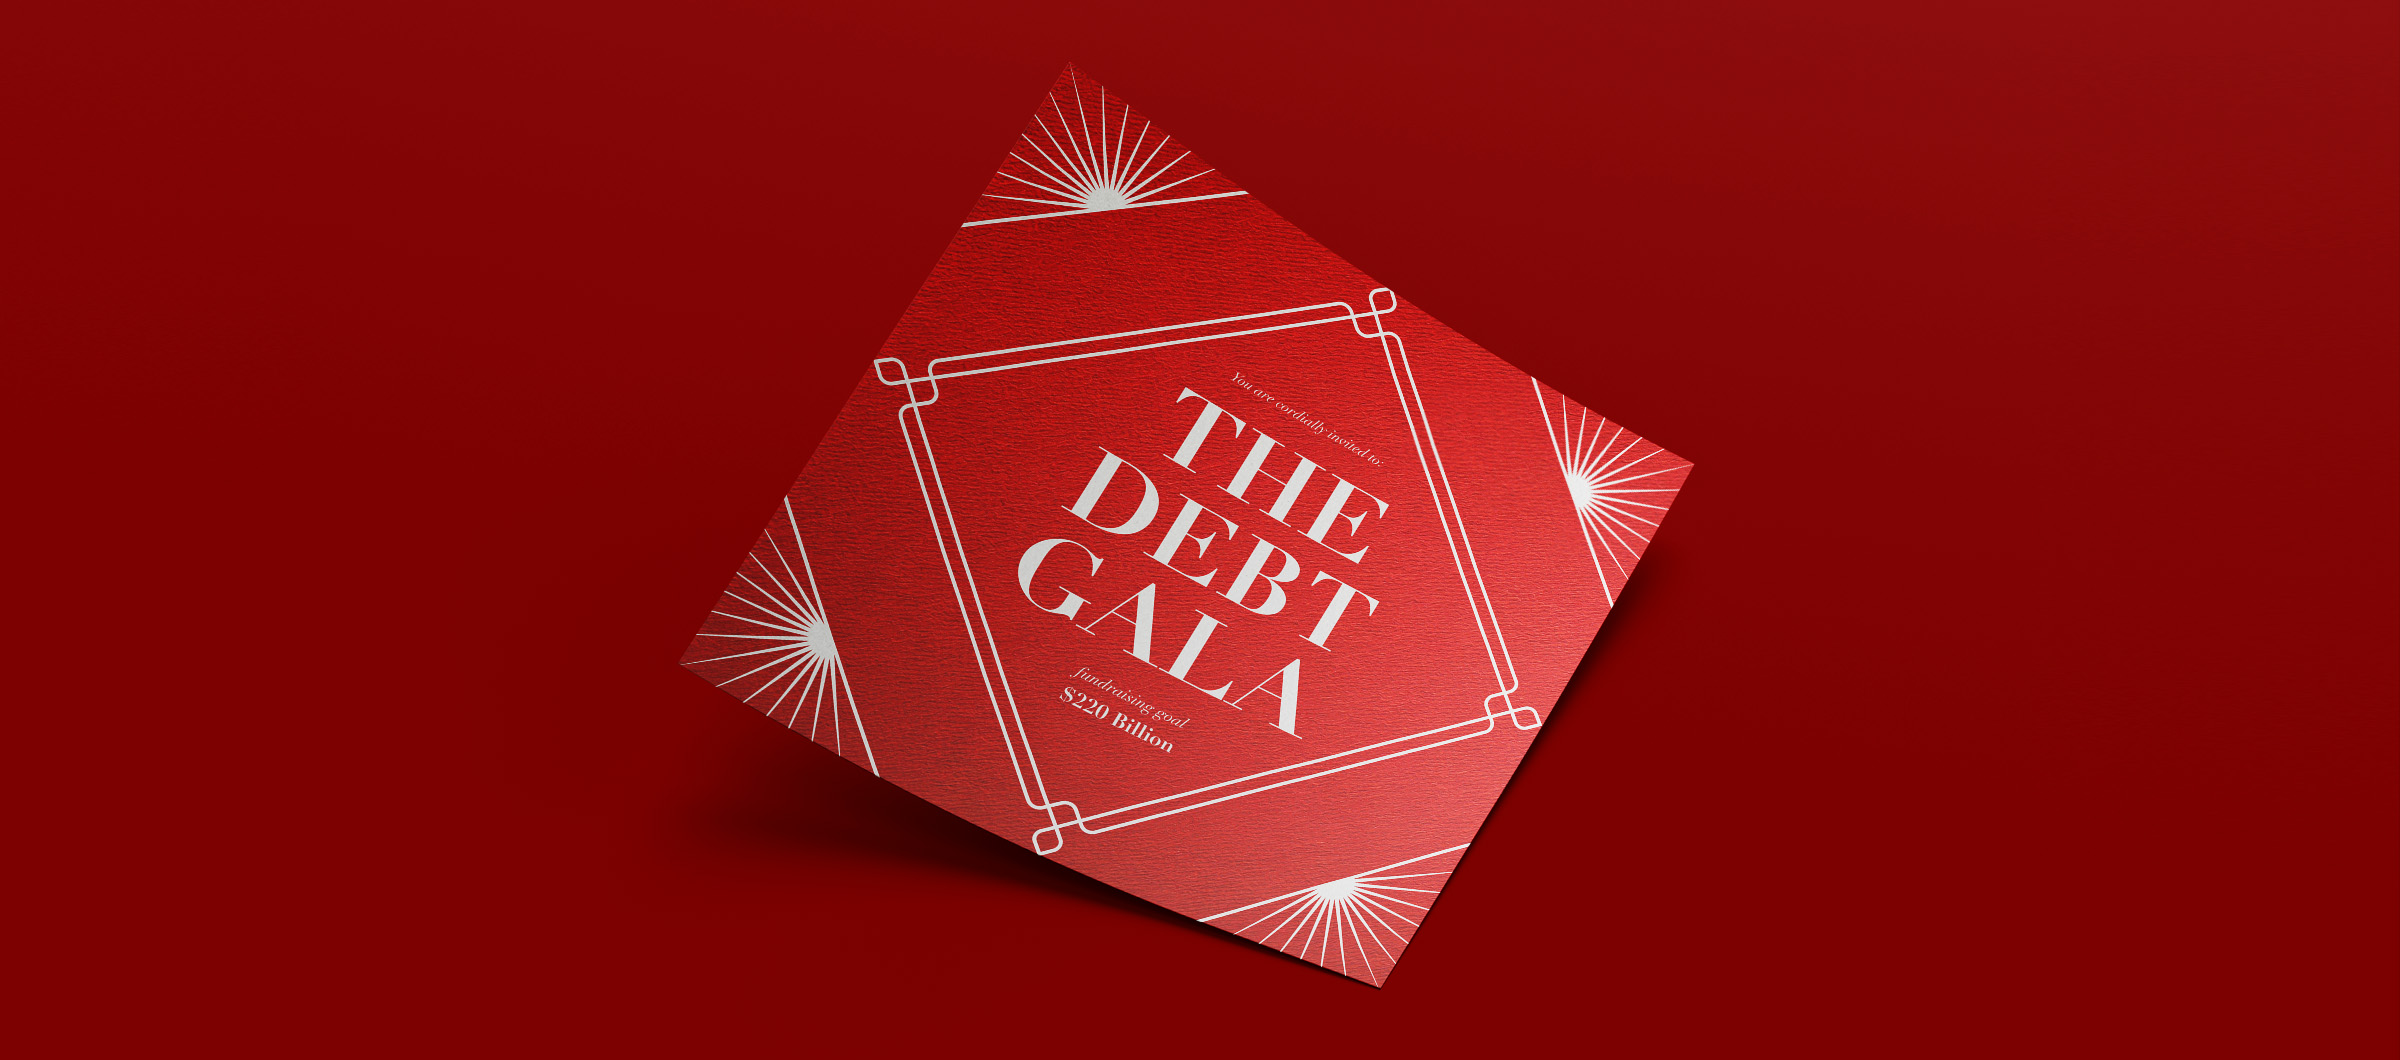 Your Invitation to the Debt Gala